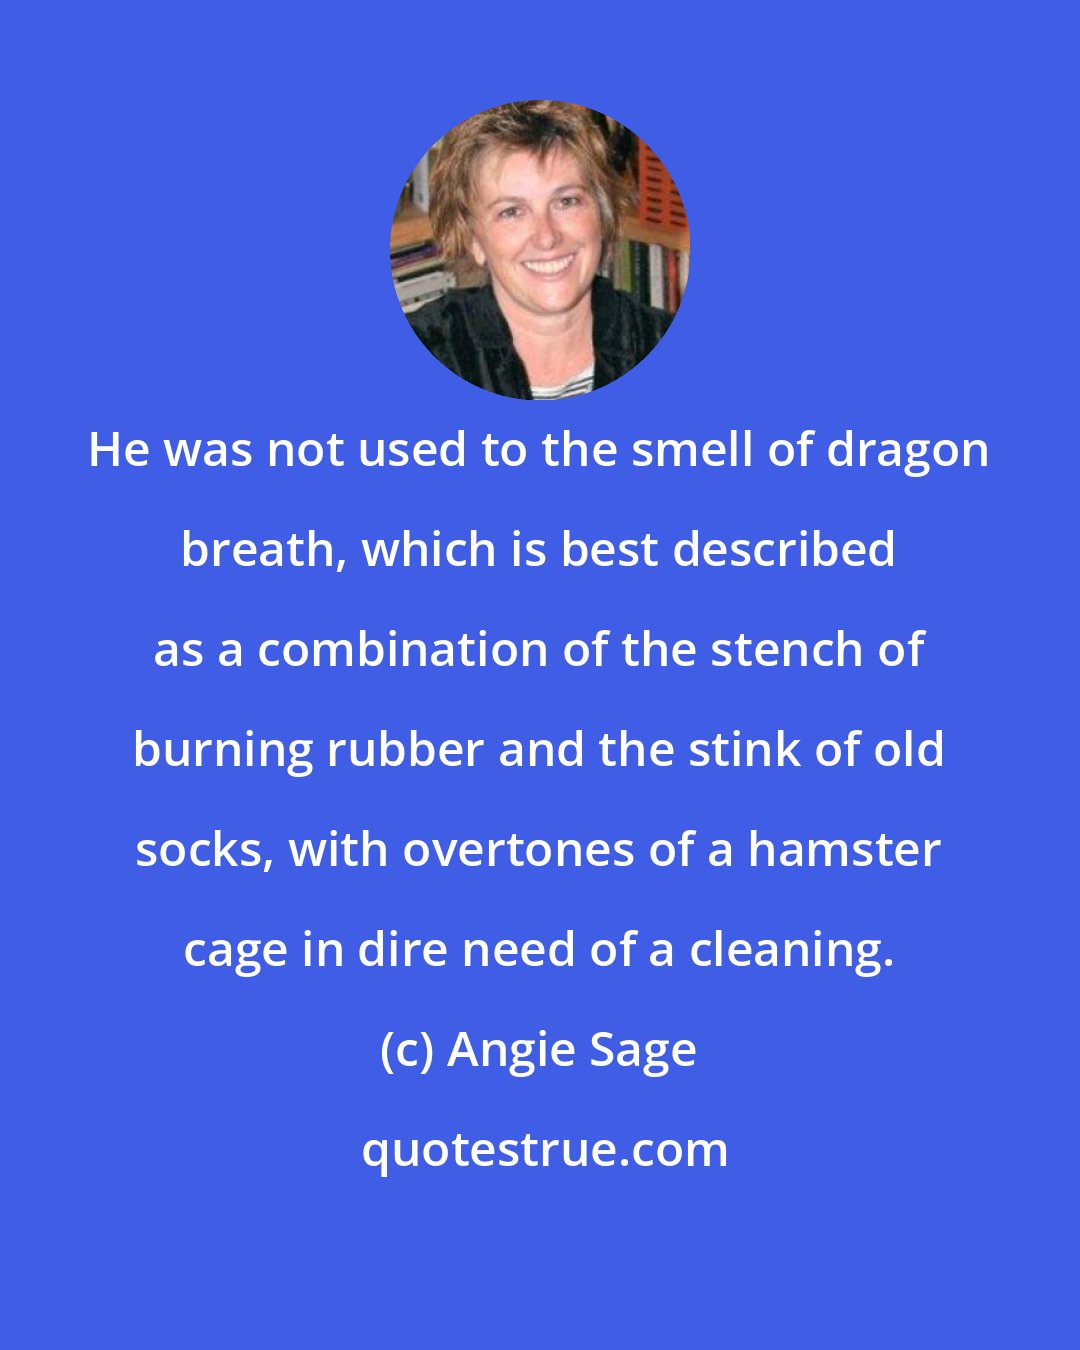 Angie Sage: He was not used to the smell of dragon breath, which is best described as a combination of the stench of burning rubber and the stink of old socks, with overtones of a hamster cage in dire need of a cleaning.